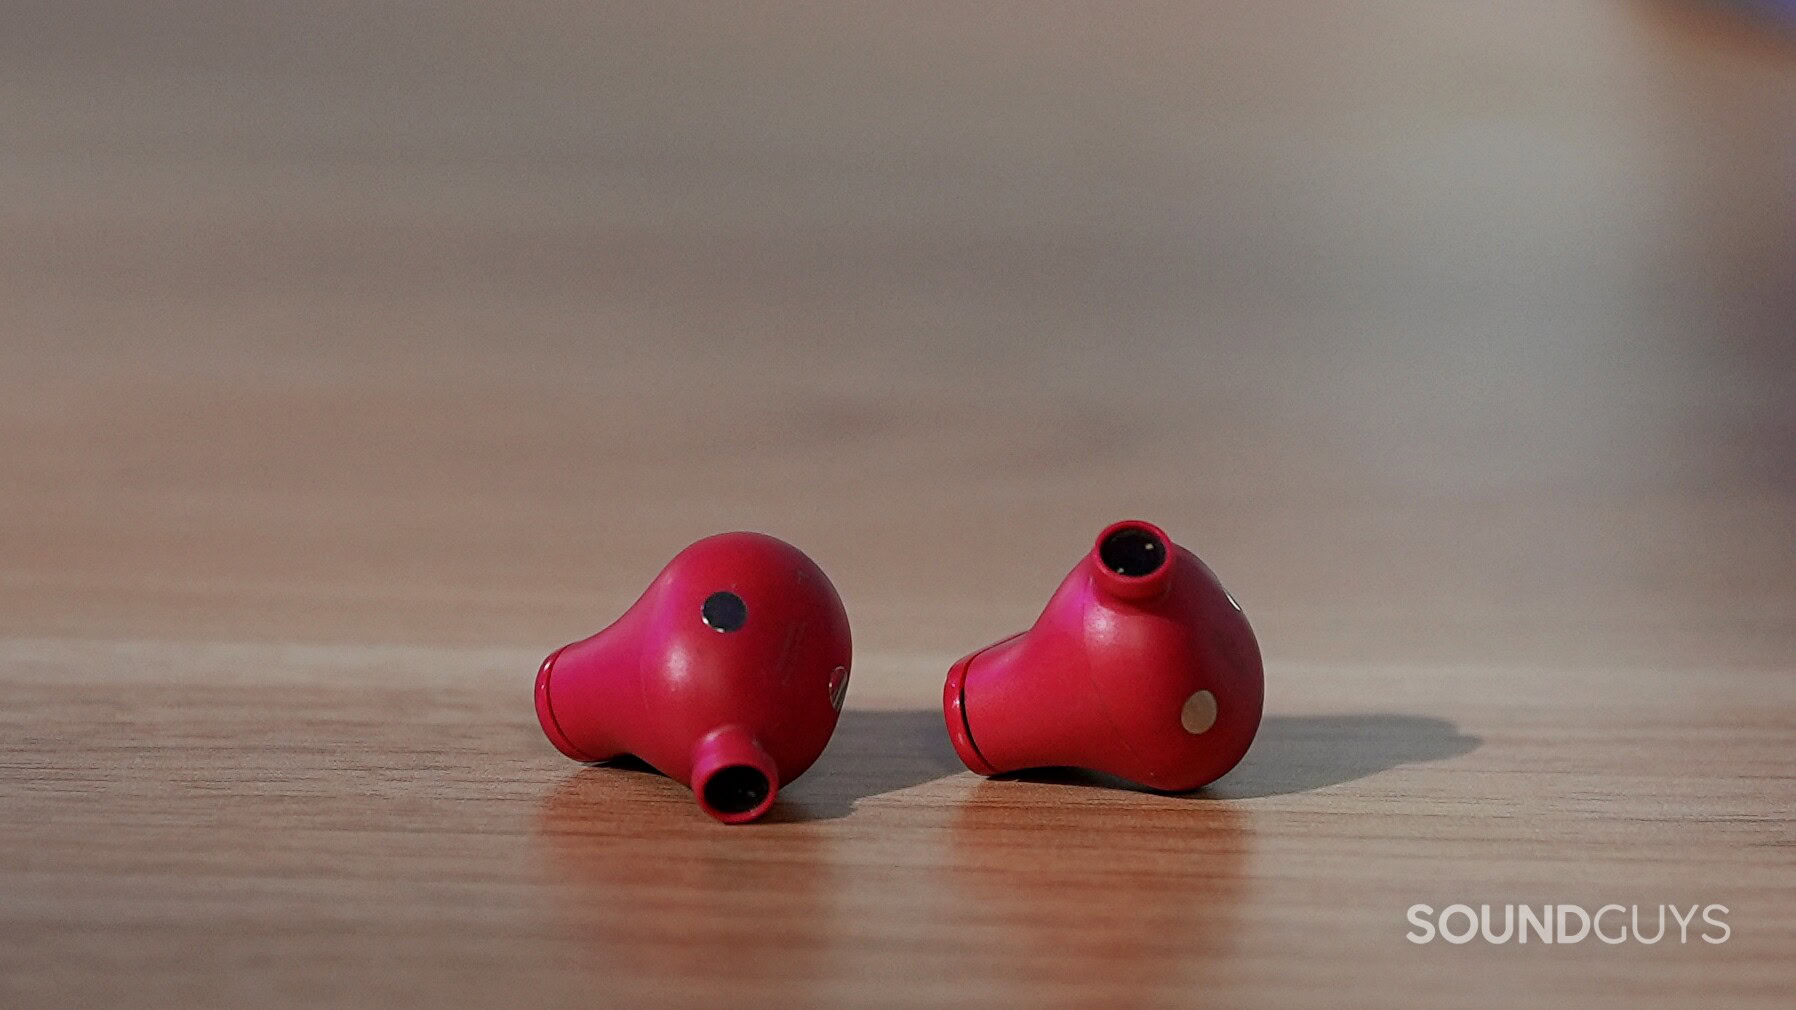 Beats Studio Buds noise-canceling true wireless headphones that display the driver grille without wearing earplugs.